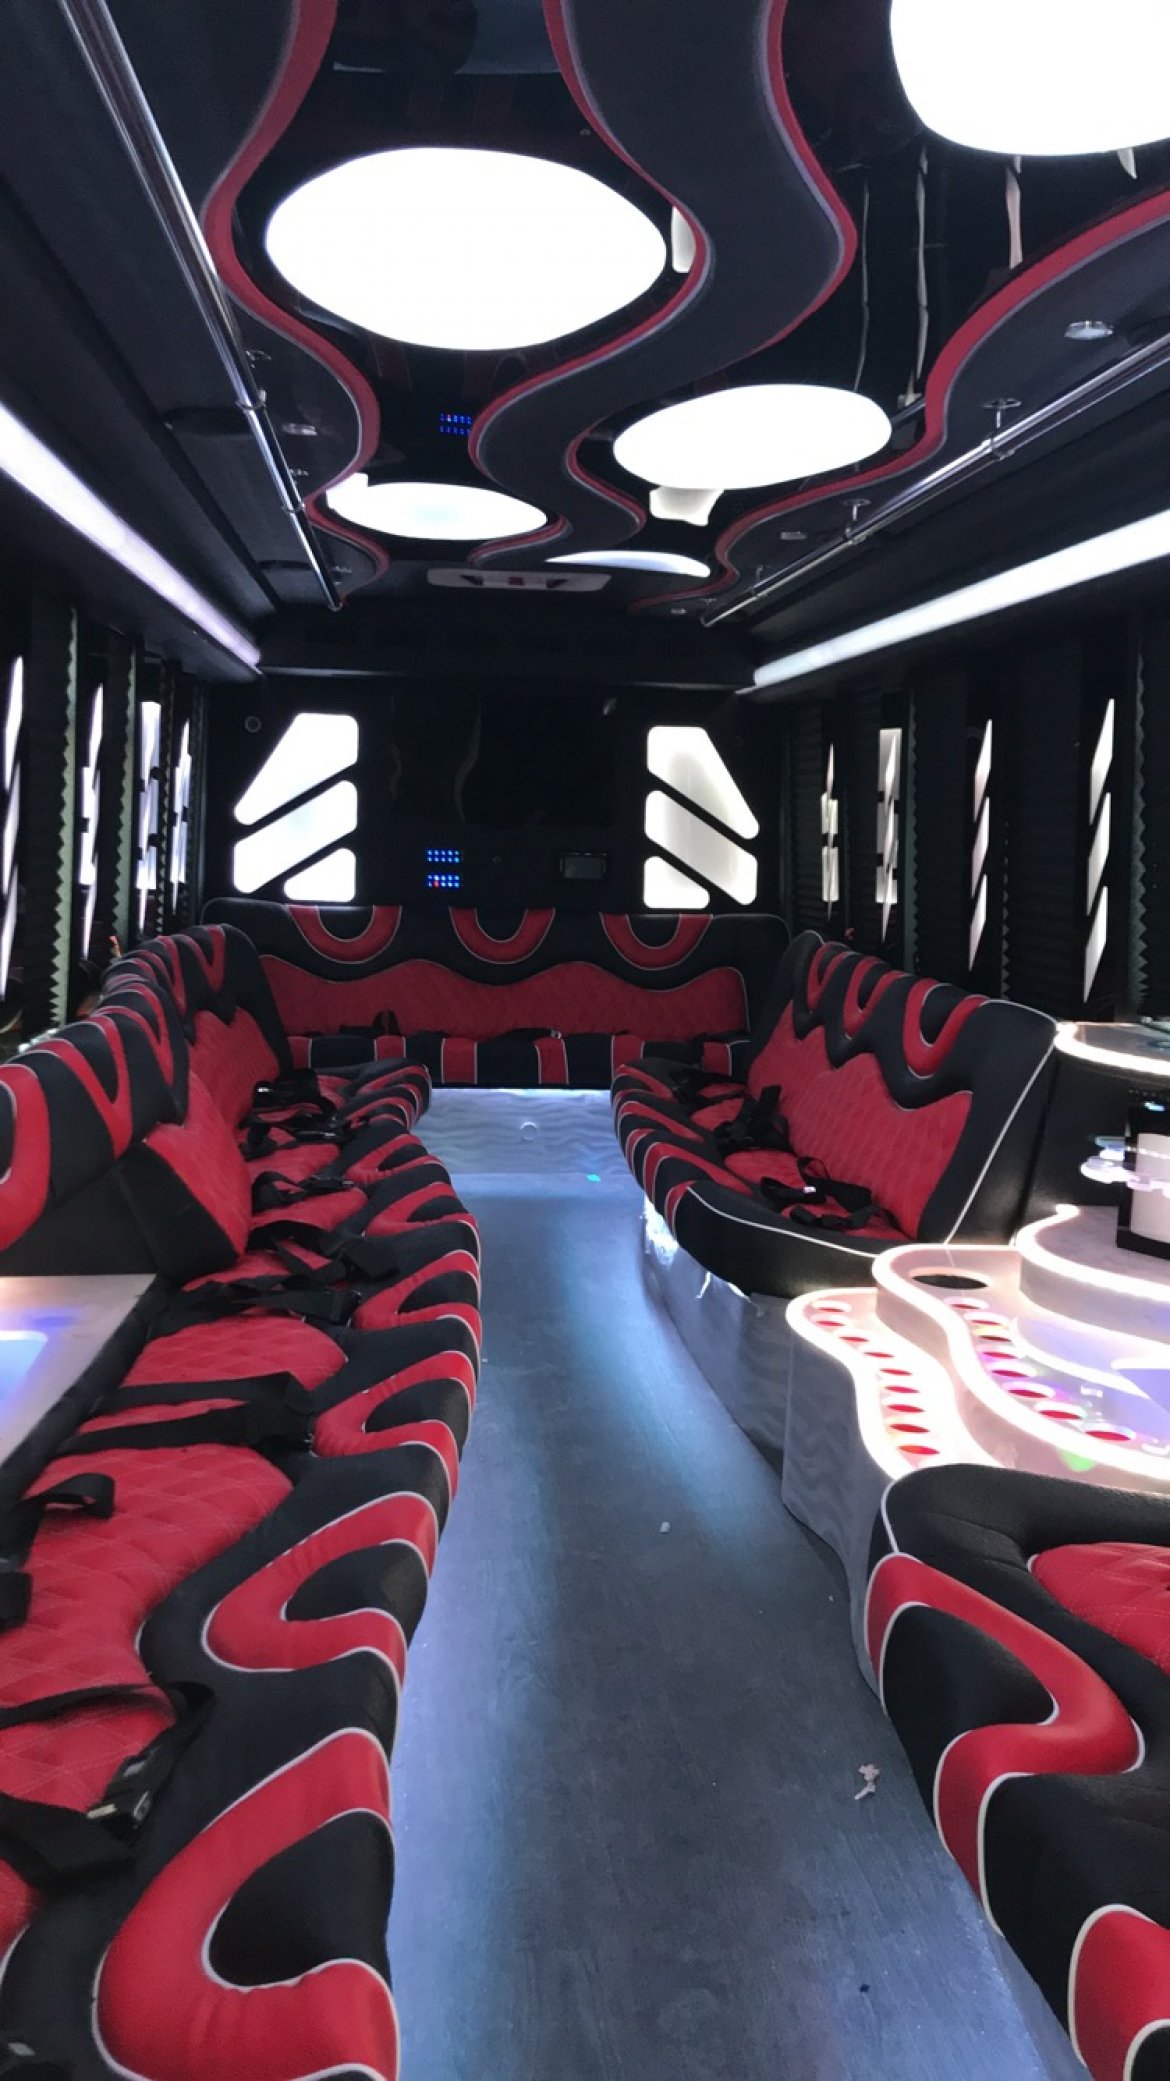 Limo Bus for sale: 2007 GMC GMC 5500 by Limos by moonlight